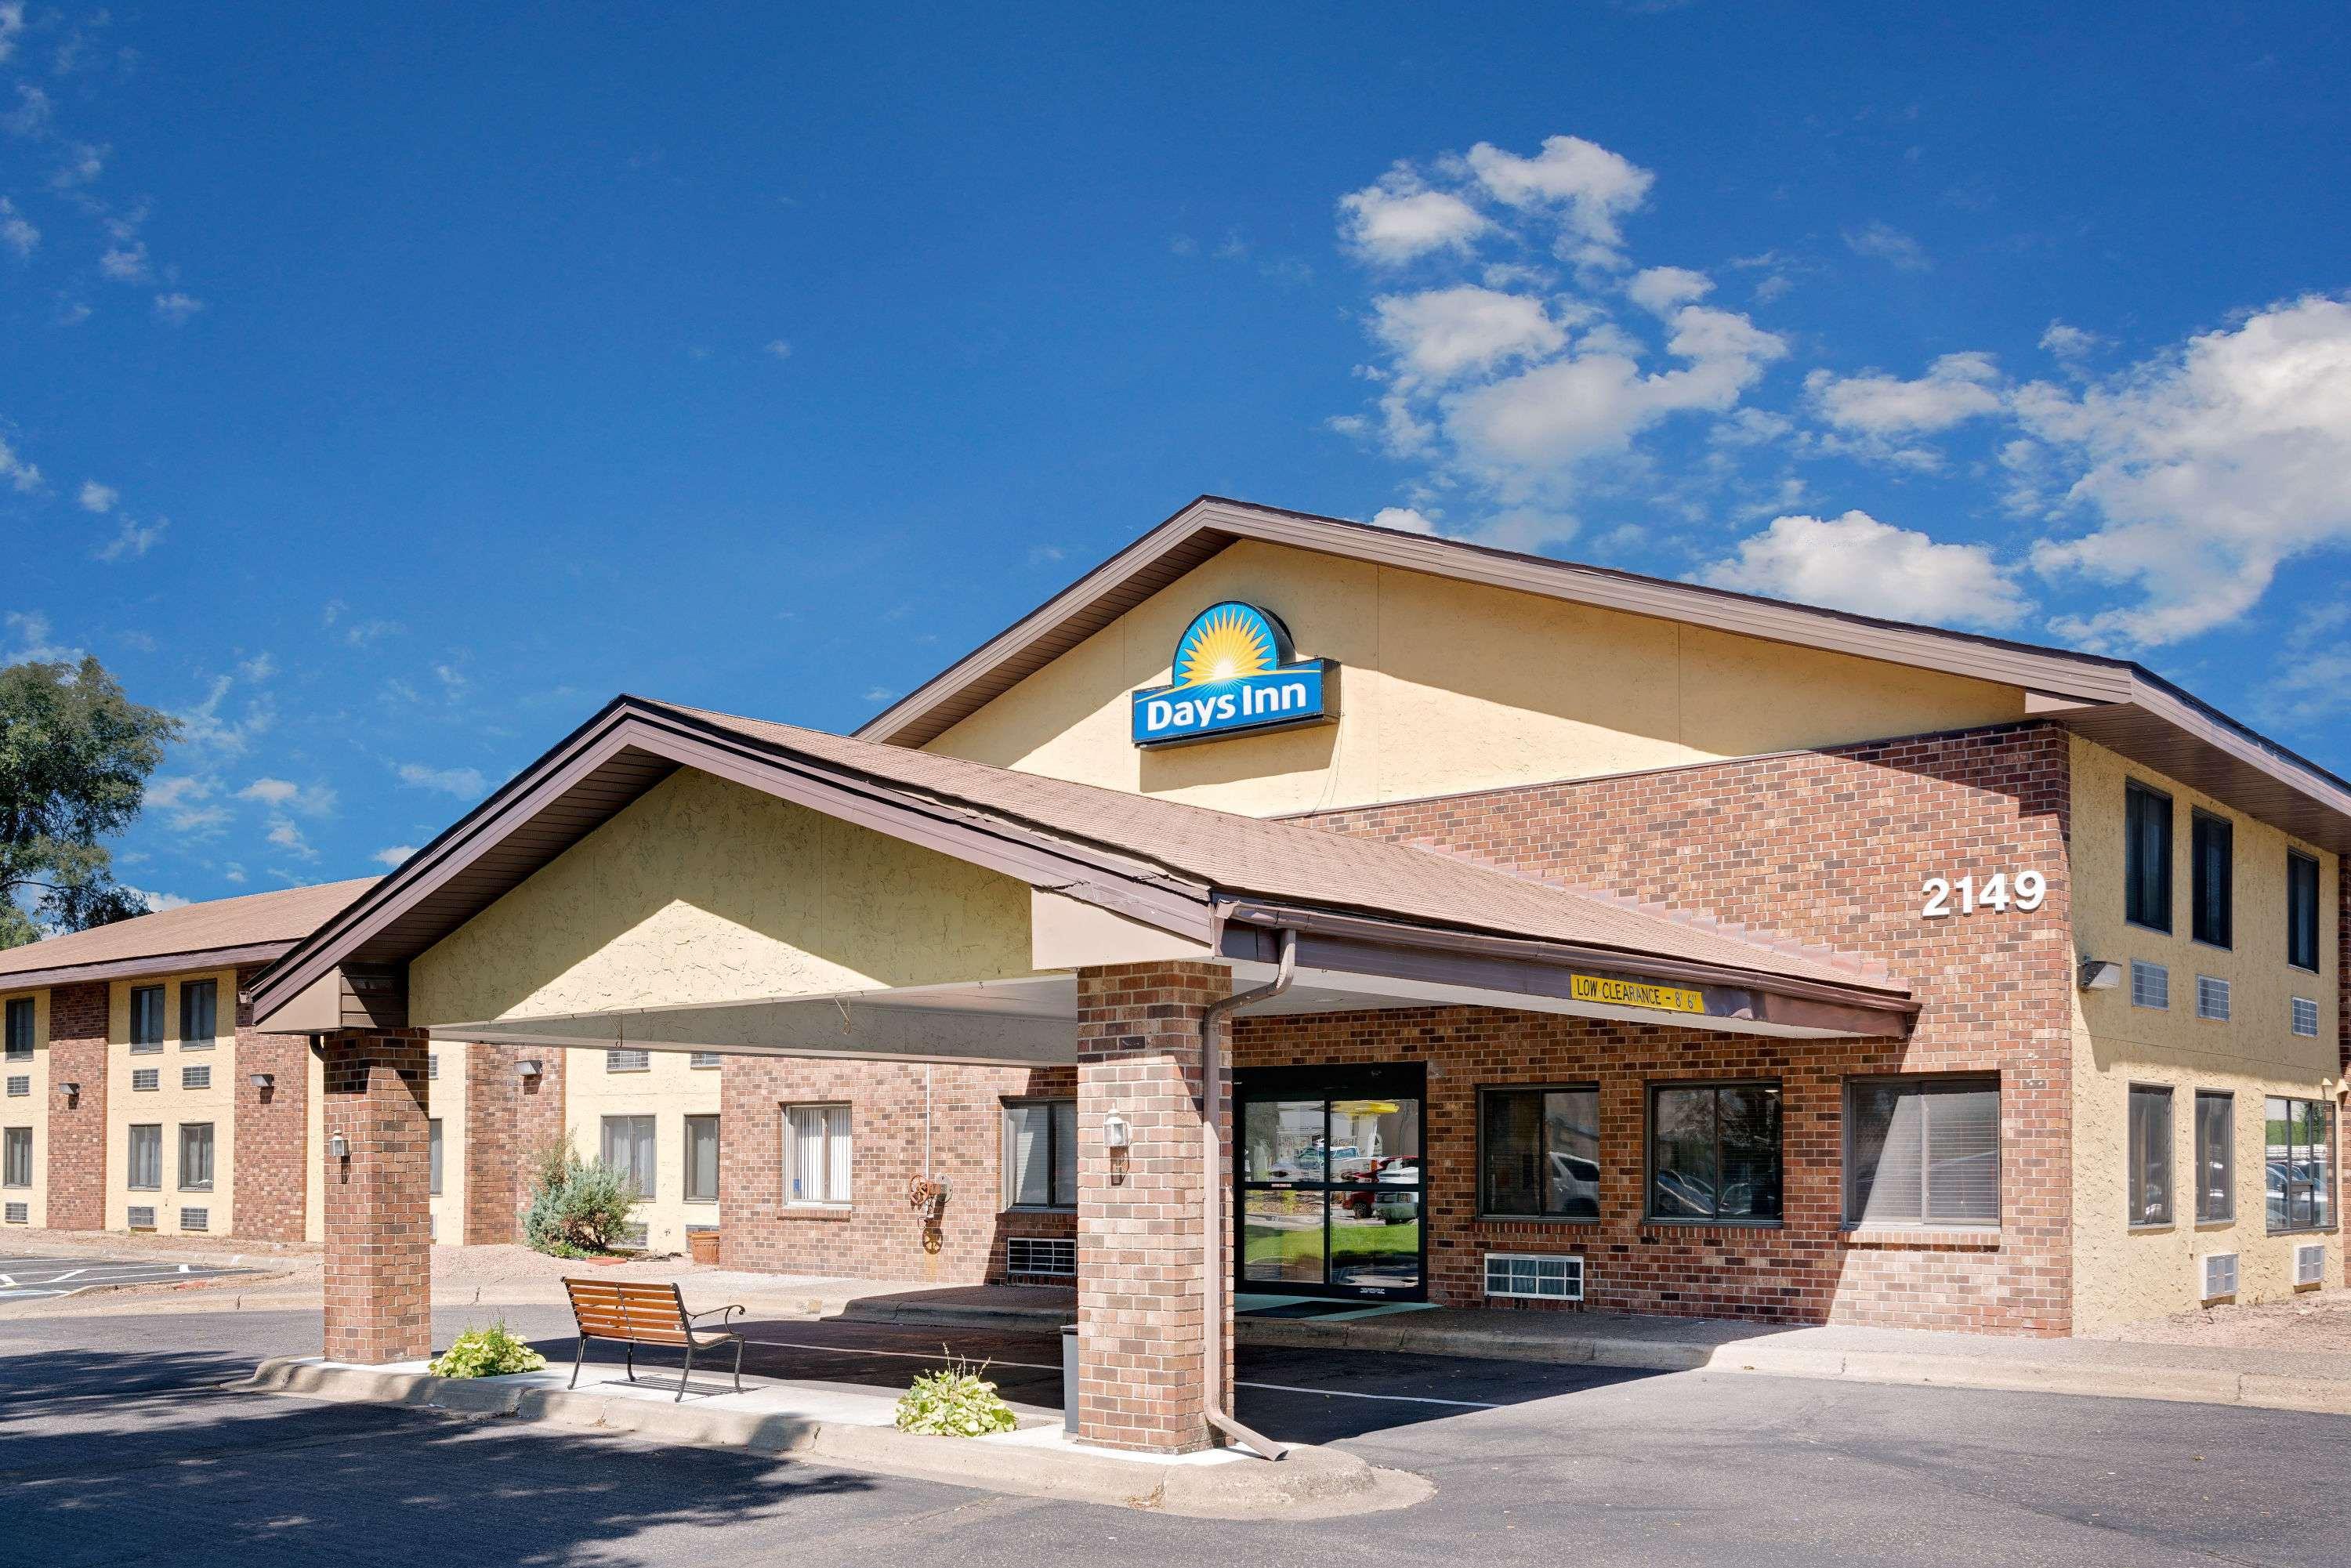 Days Inn Twin Cities North - Mounds View